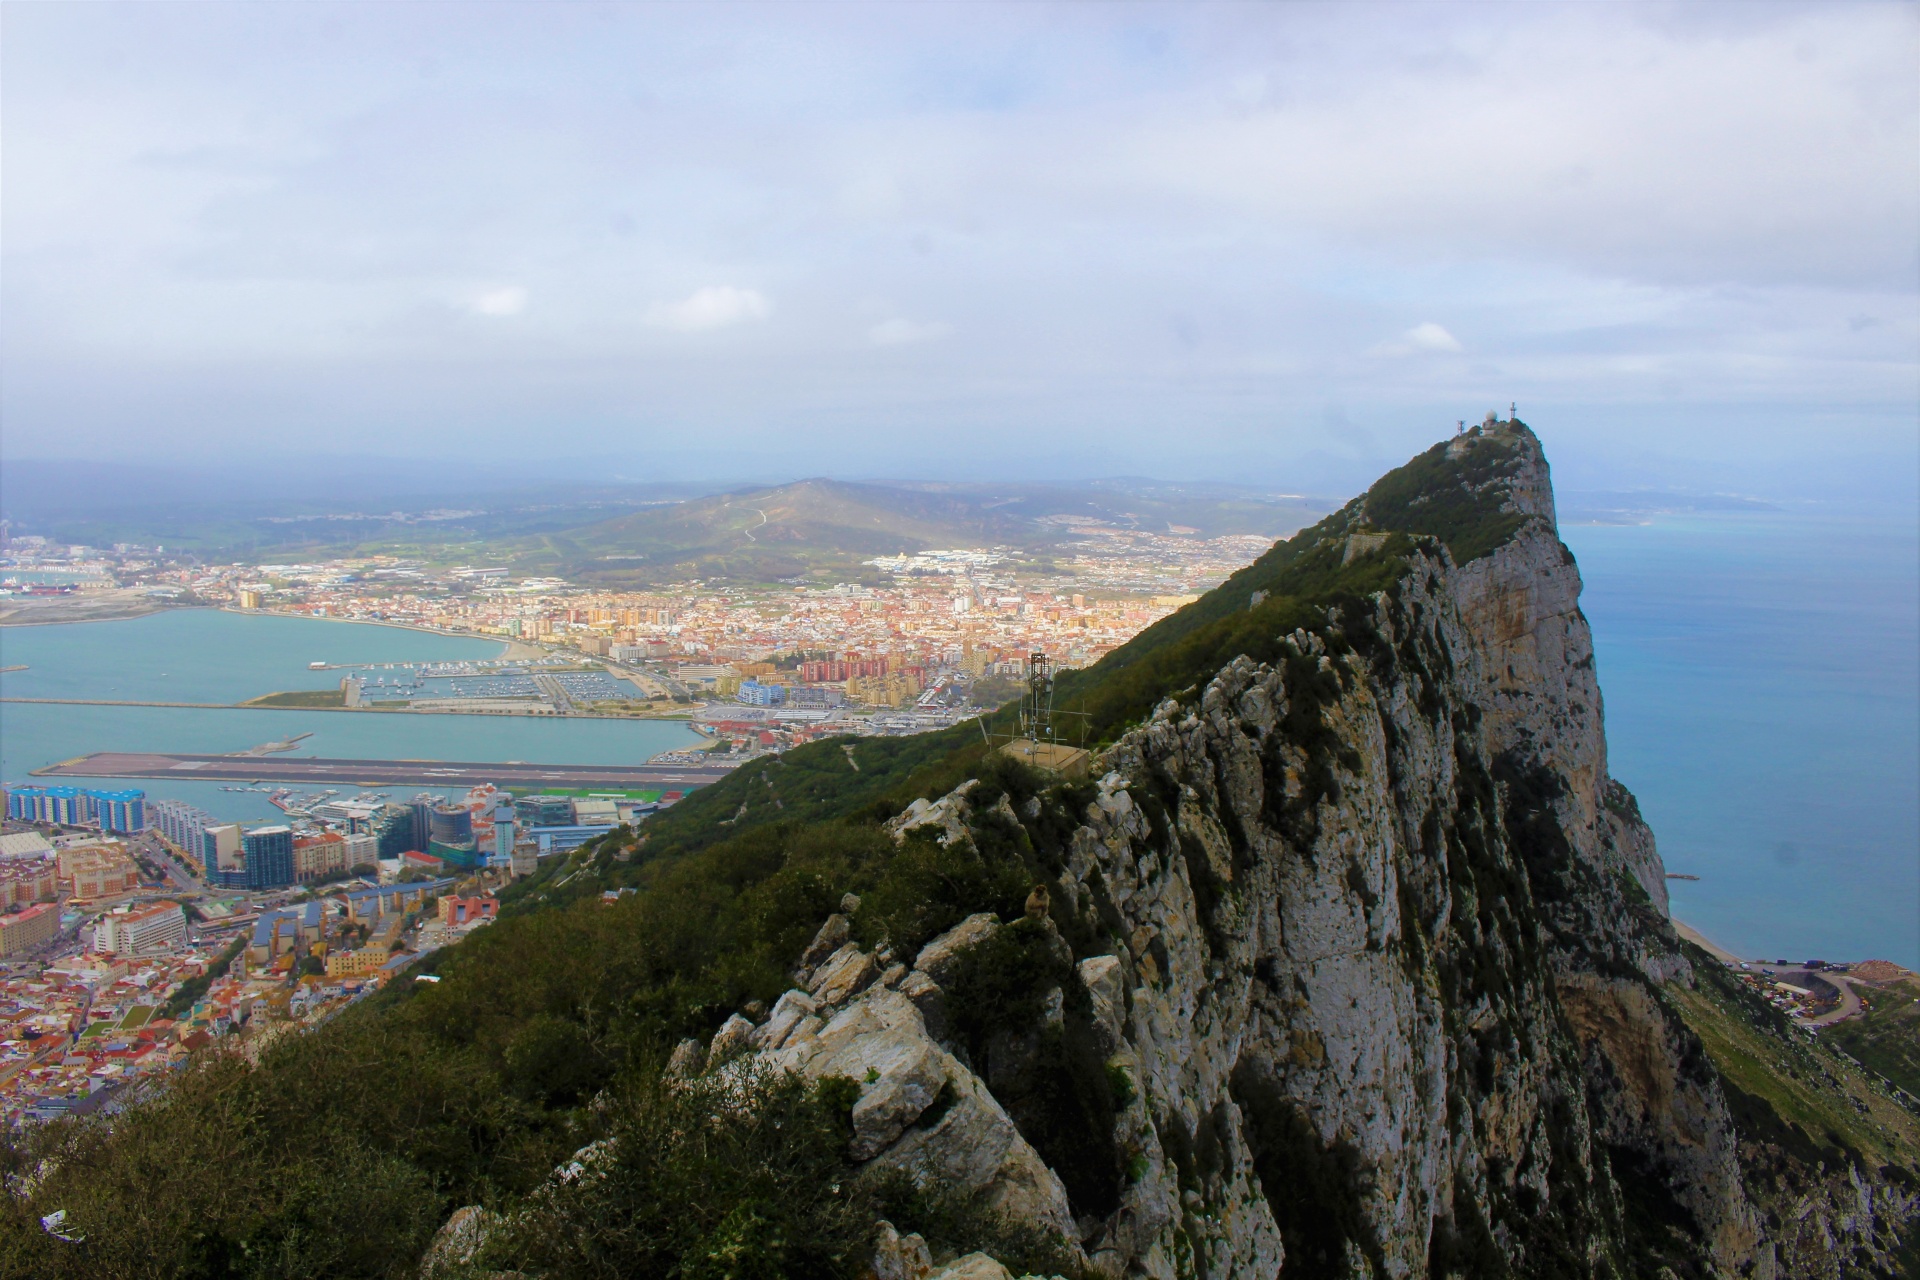 Top Of The Rock Of Gibraltar